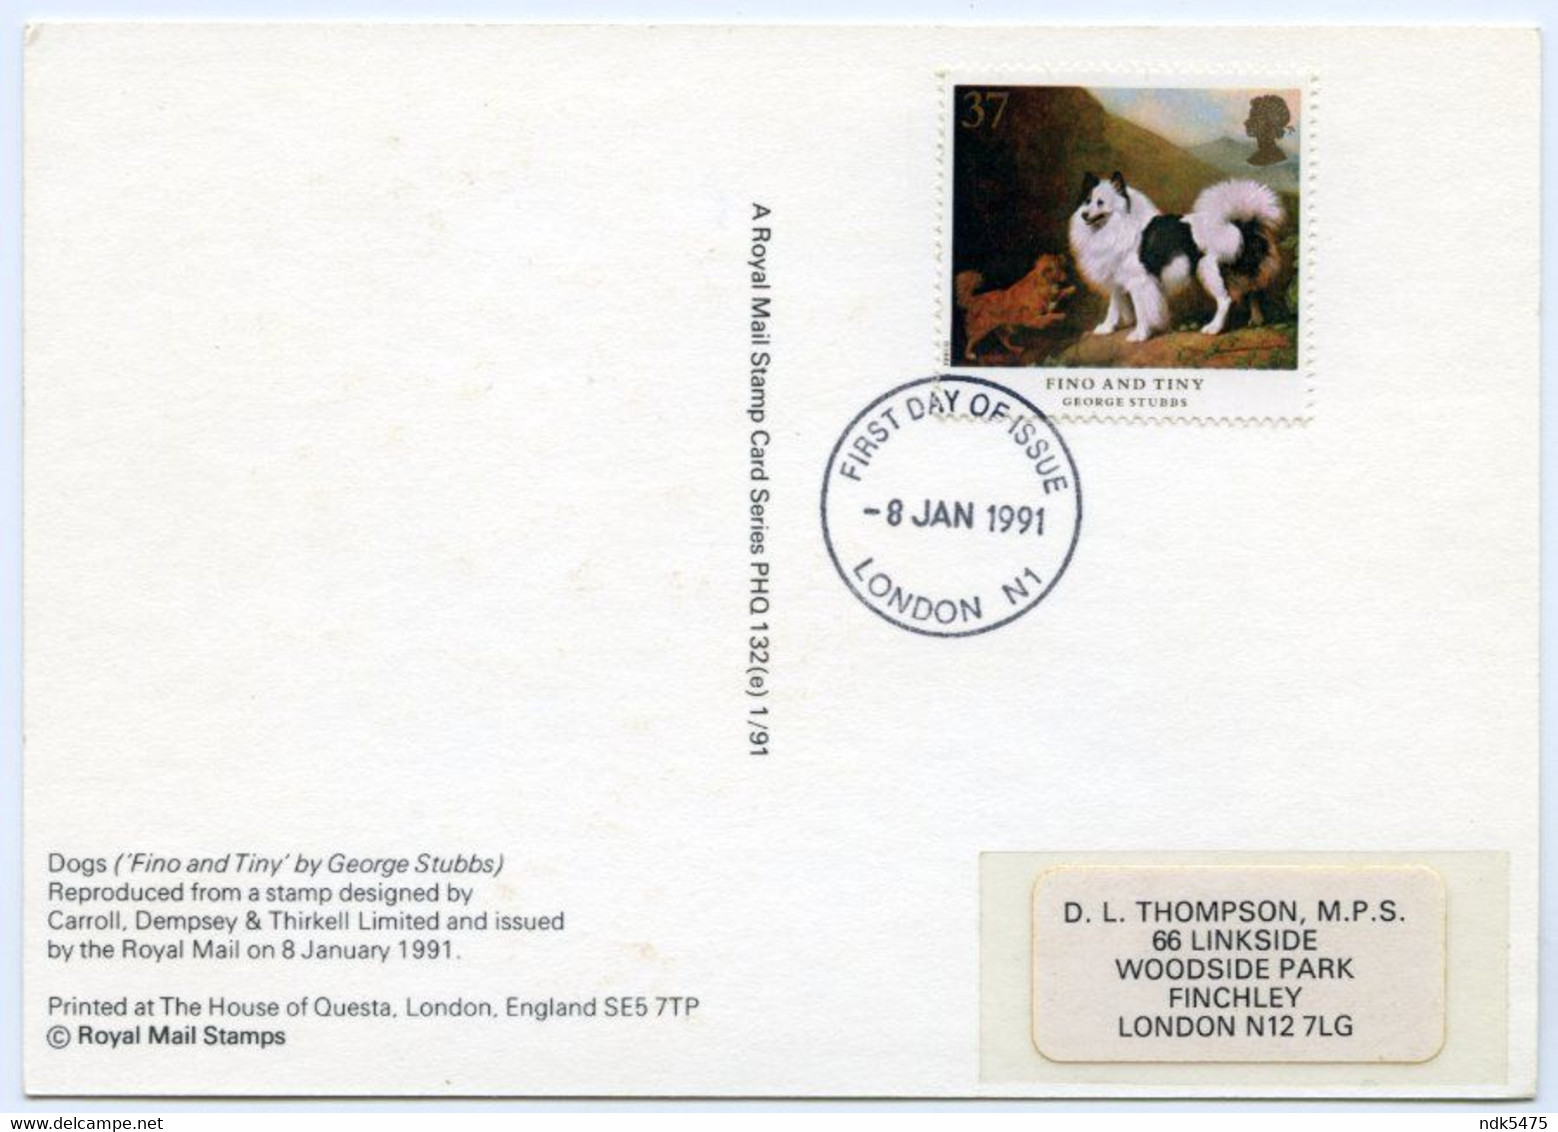 PHQ : GEORGE STUBBS - DOGS, FINO AND TINY, 1991 : FIRST DAY OF ISSUE, LONDON N1, FINCHLEY (10 X 15cms Approx.) - PHQ Cards